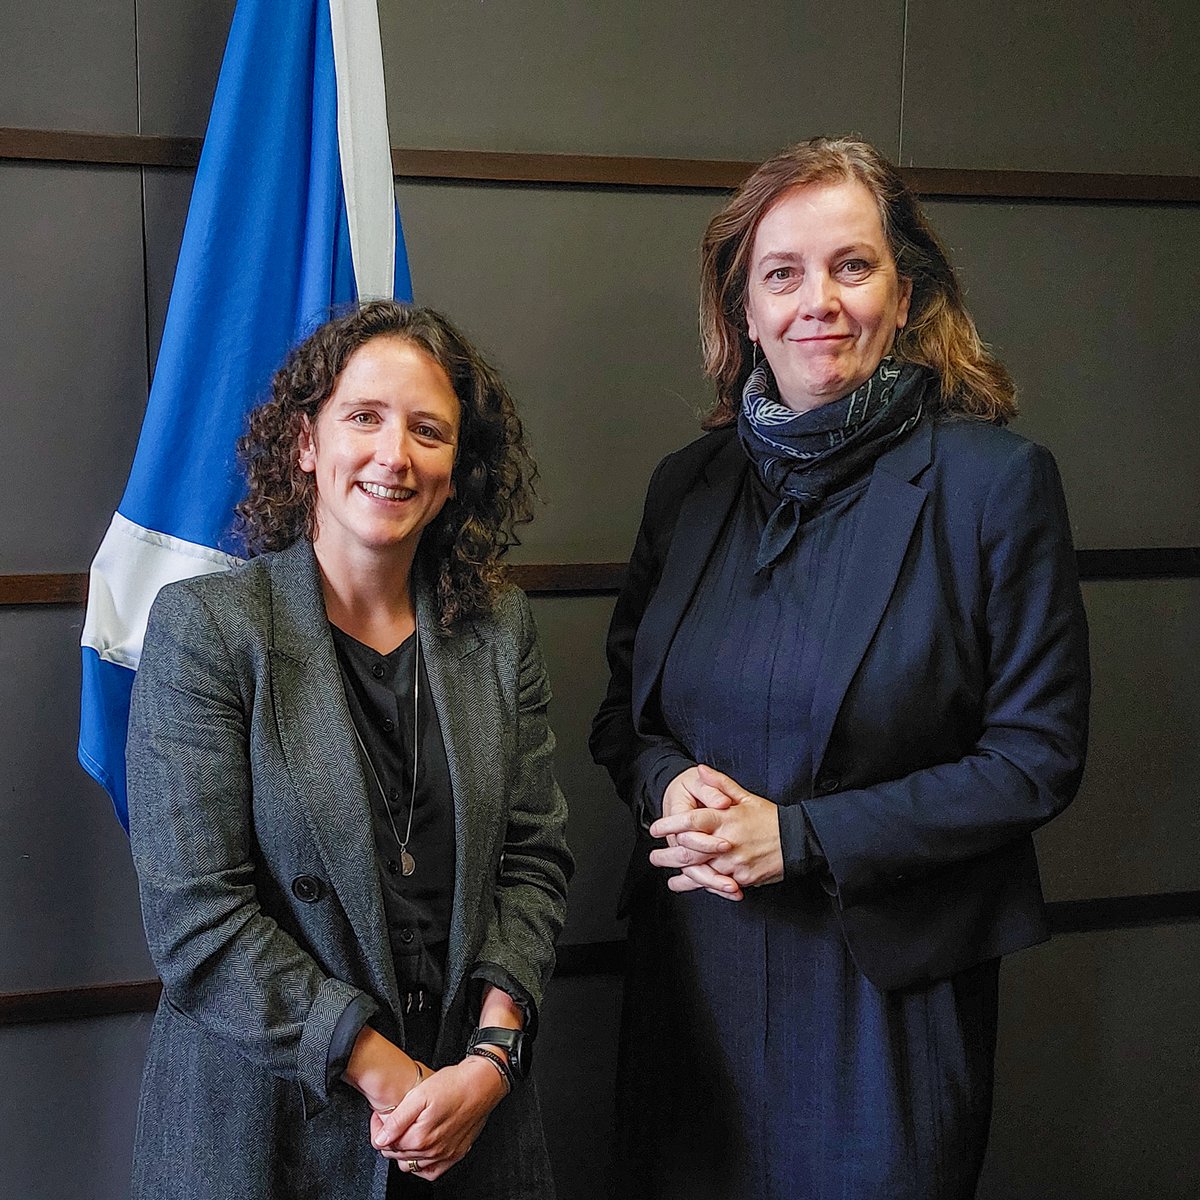 Rural Affairs Secretary Mairi Gougeon was pleased to welcome Icelandic Agriculture Minister Svandís Svavarsd to Scotland today. They discussed opportunities for mutual learning on sustainable agriculture, food production and the marine economy.